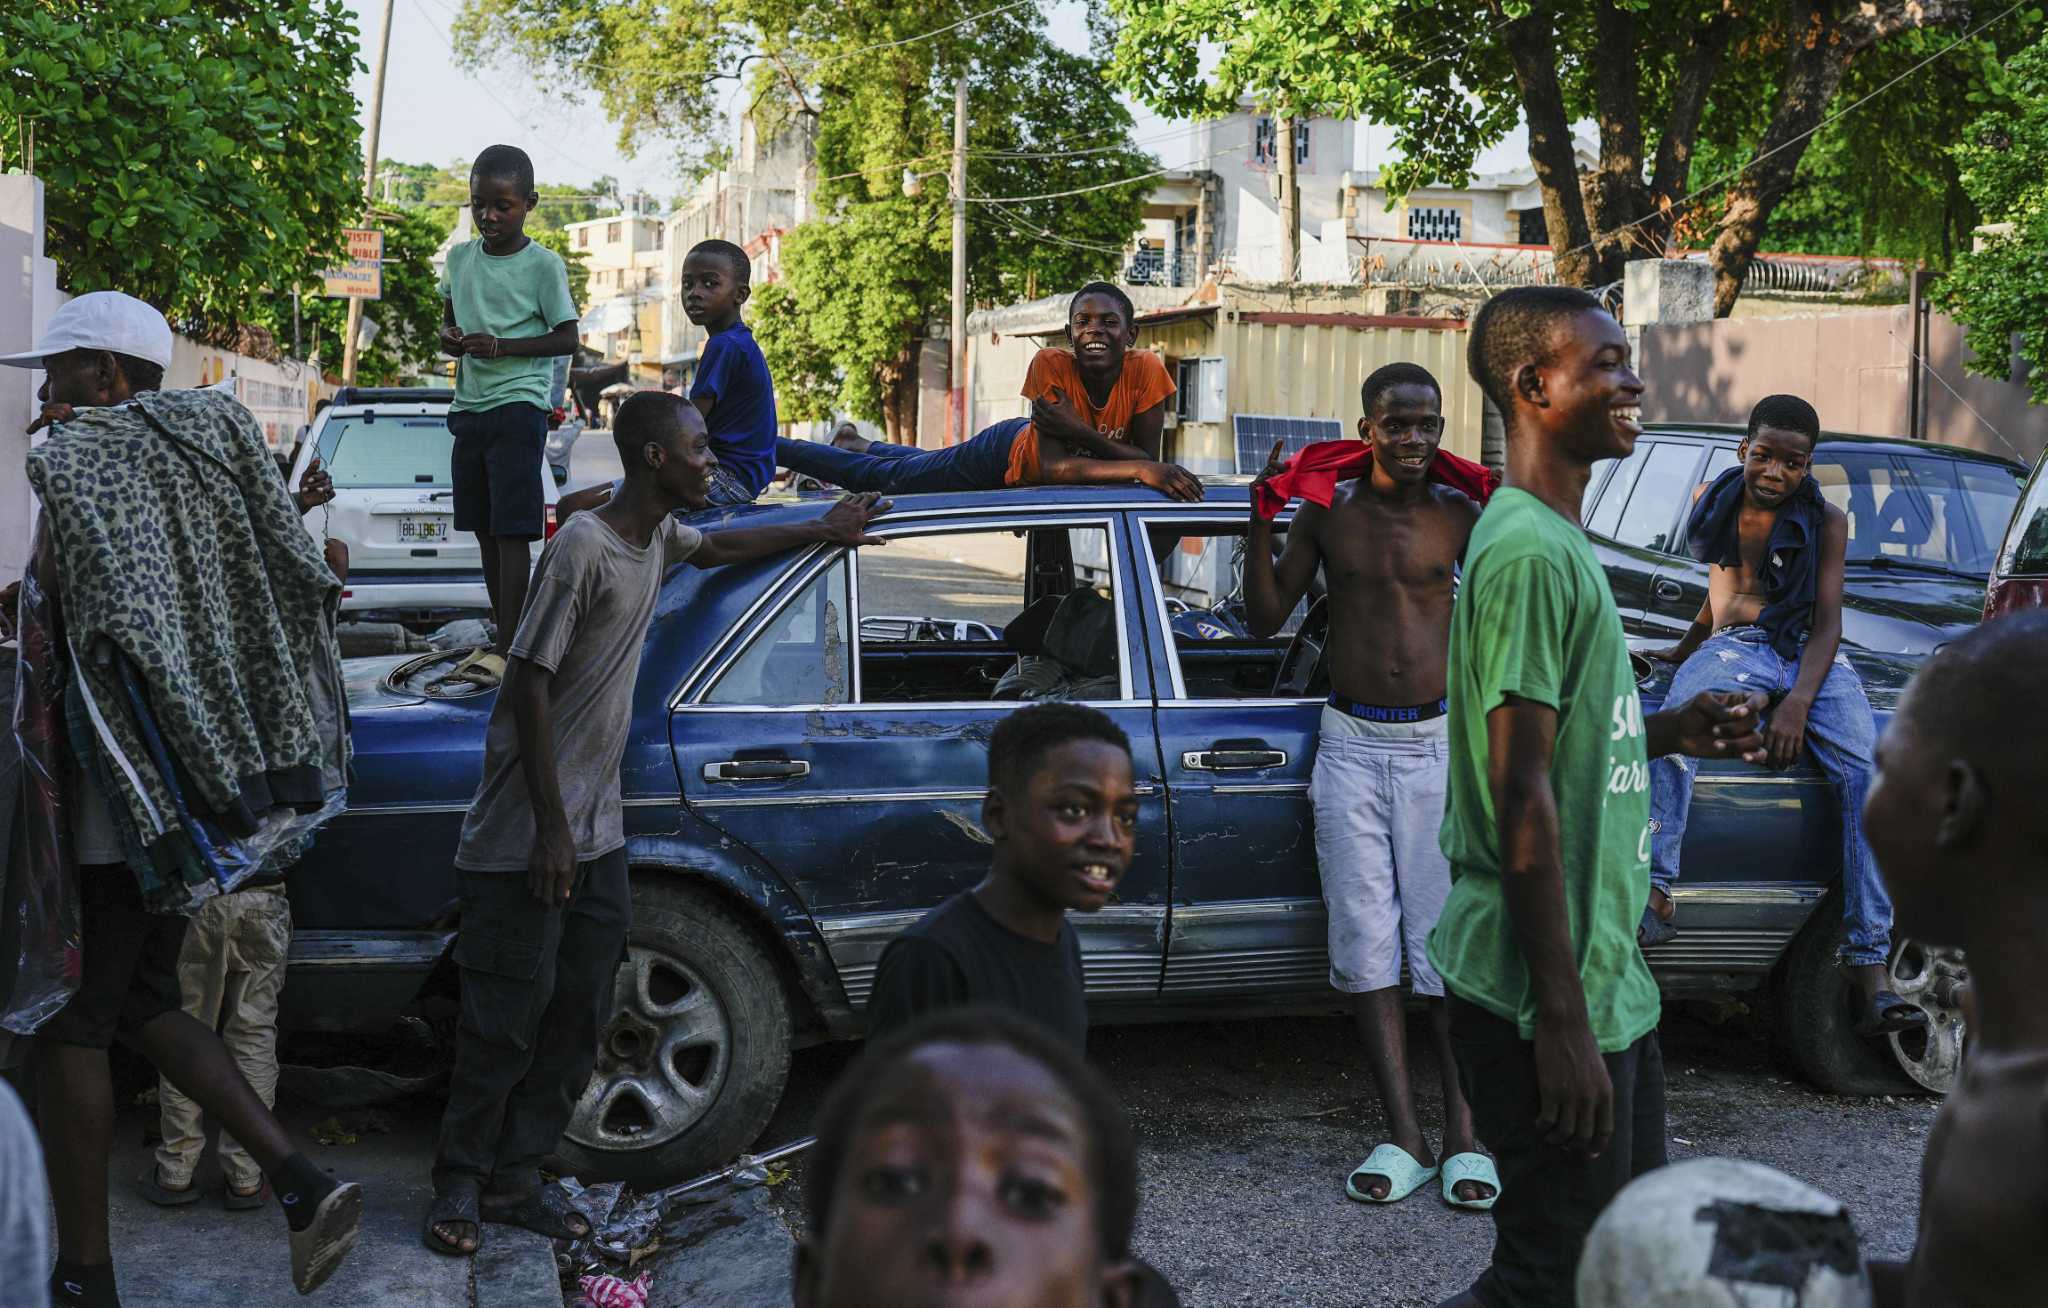 AP PHOTOS: In documenting violence in Haiti, you find bodies, but also ways people keep on living